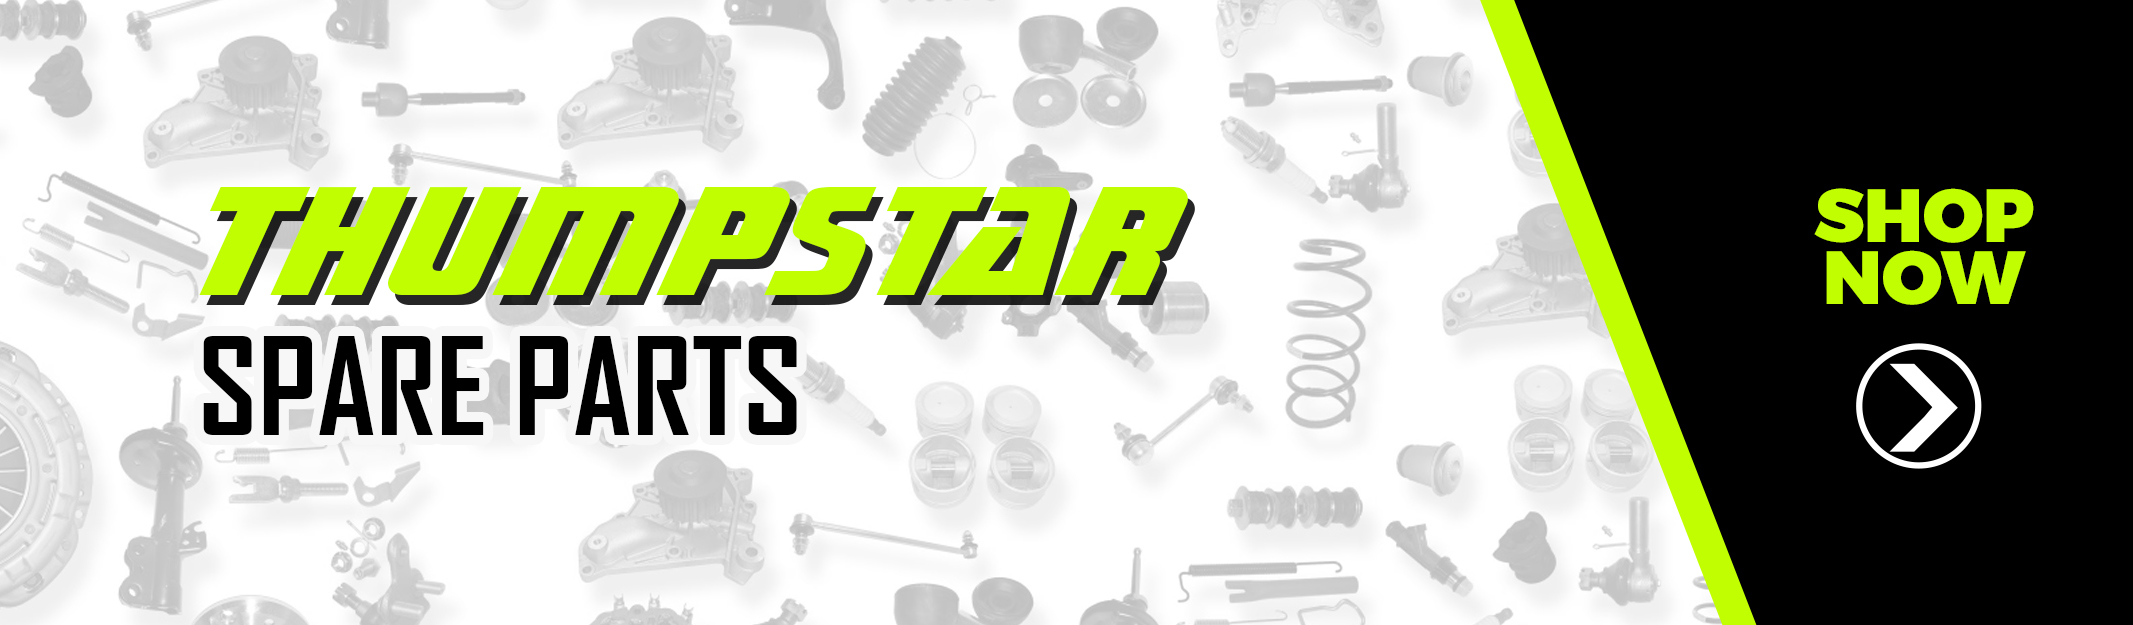 Thumpstar Spare Parts